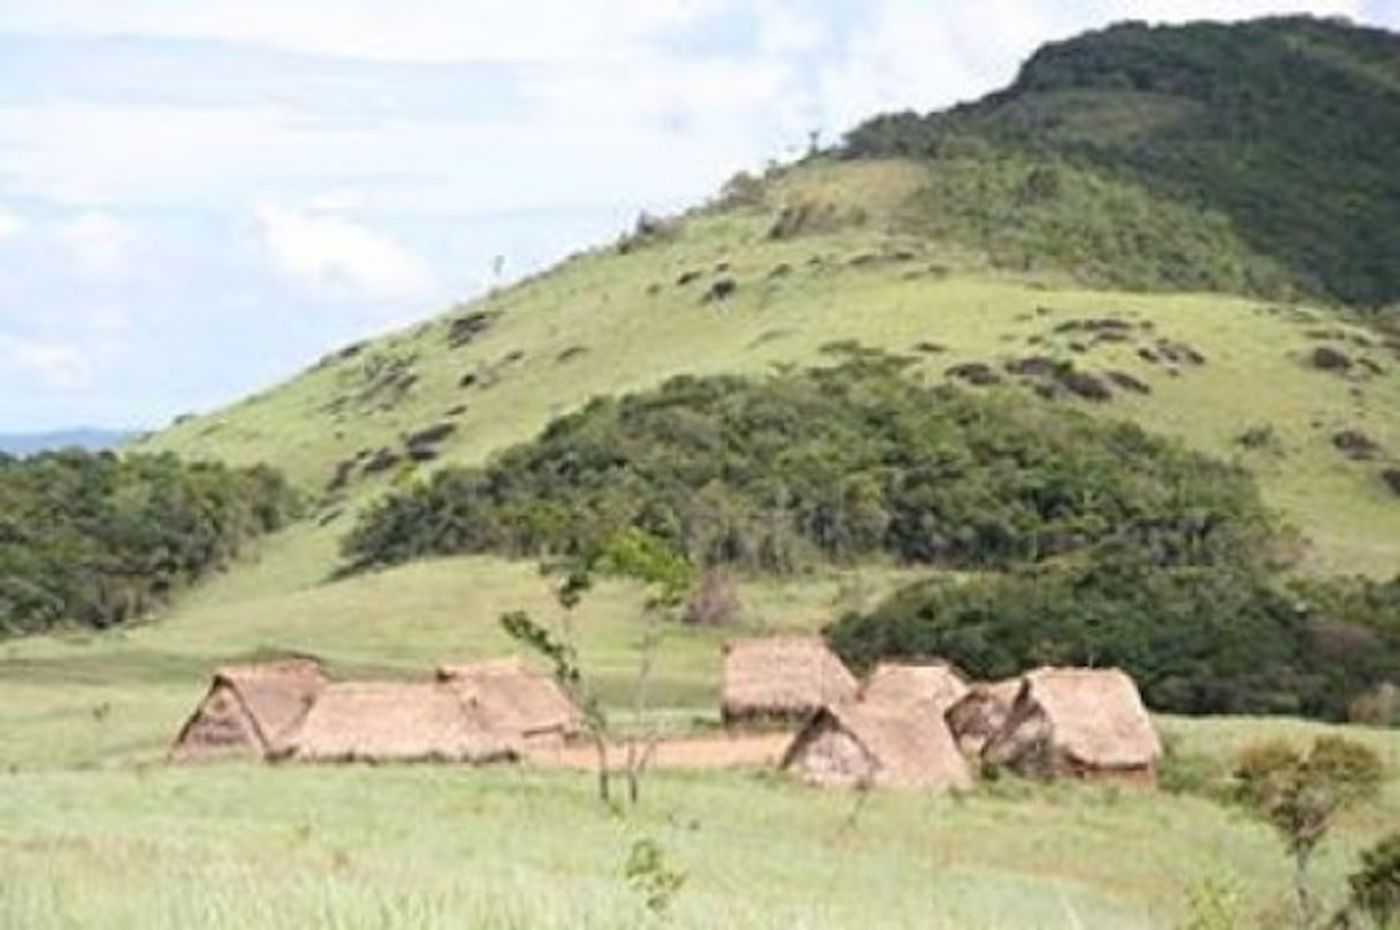 Huts in an isolated village inhabited by Yanomami Amerindians in southern Venezuela. Members of the tribe were isolated from the modern world and had never been exposed to antibiotic drugs, but the bacteria on their skin and in their mouths and intestines still had antibiotic resistance genes.